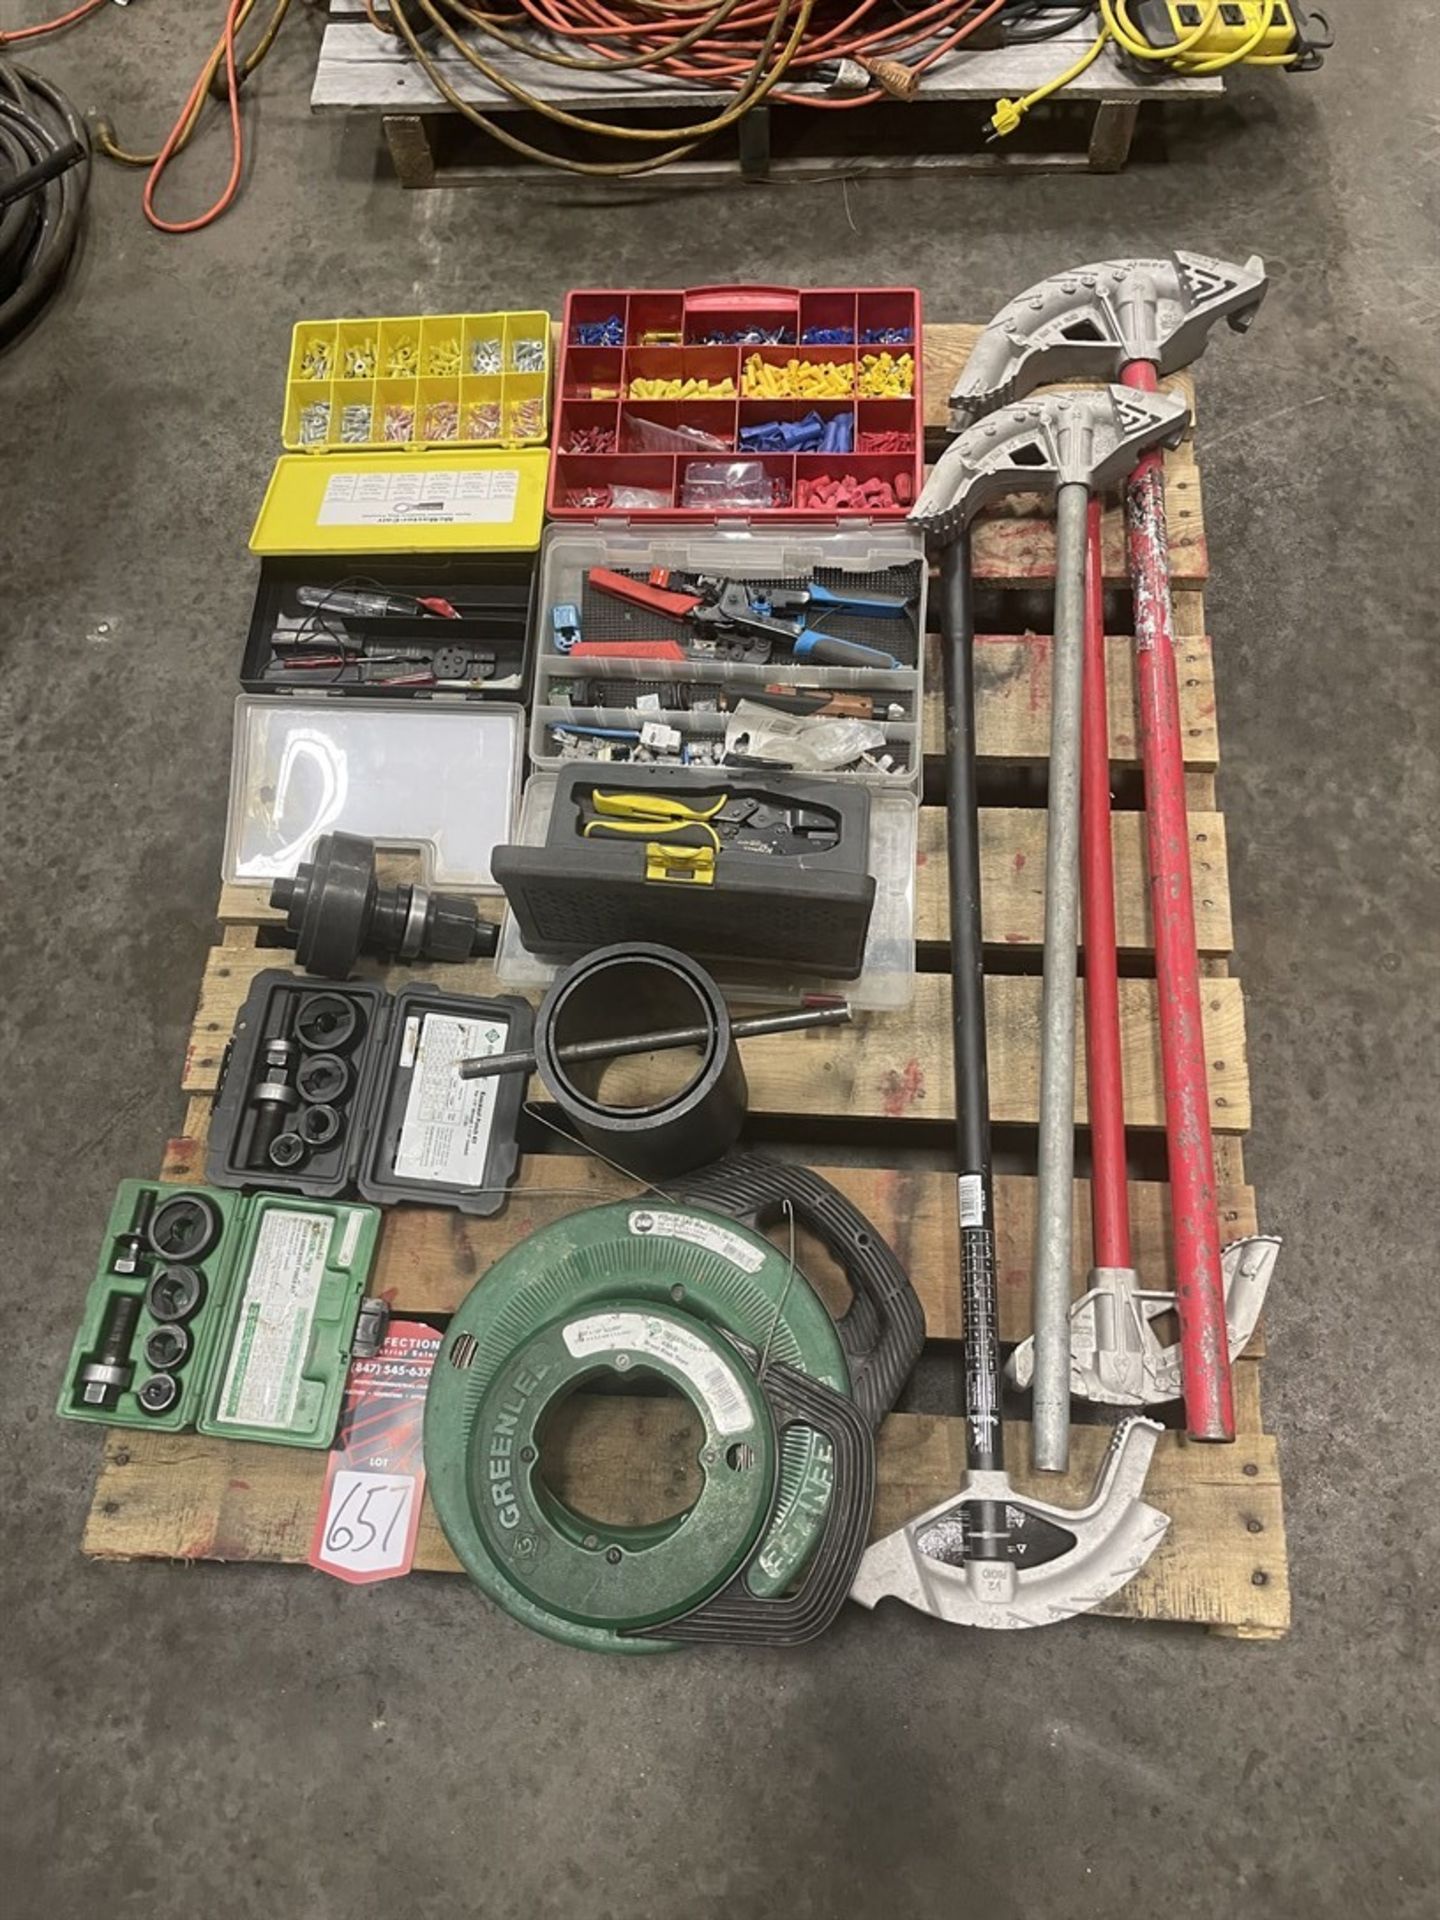 Pallet of Greenlee Knock out Punch Kits, Greenlee Fish Tapes, Conduit Benders and Assorted Crimps